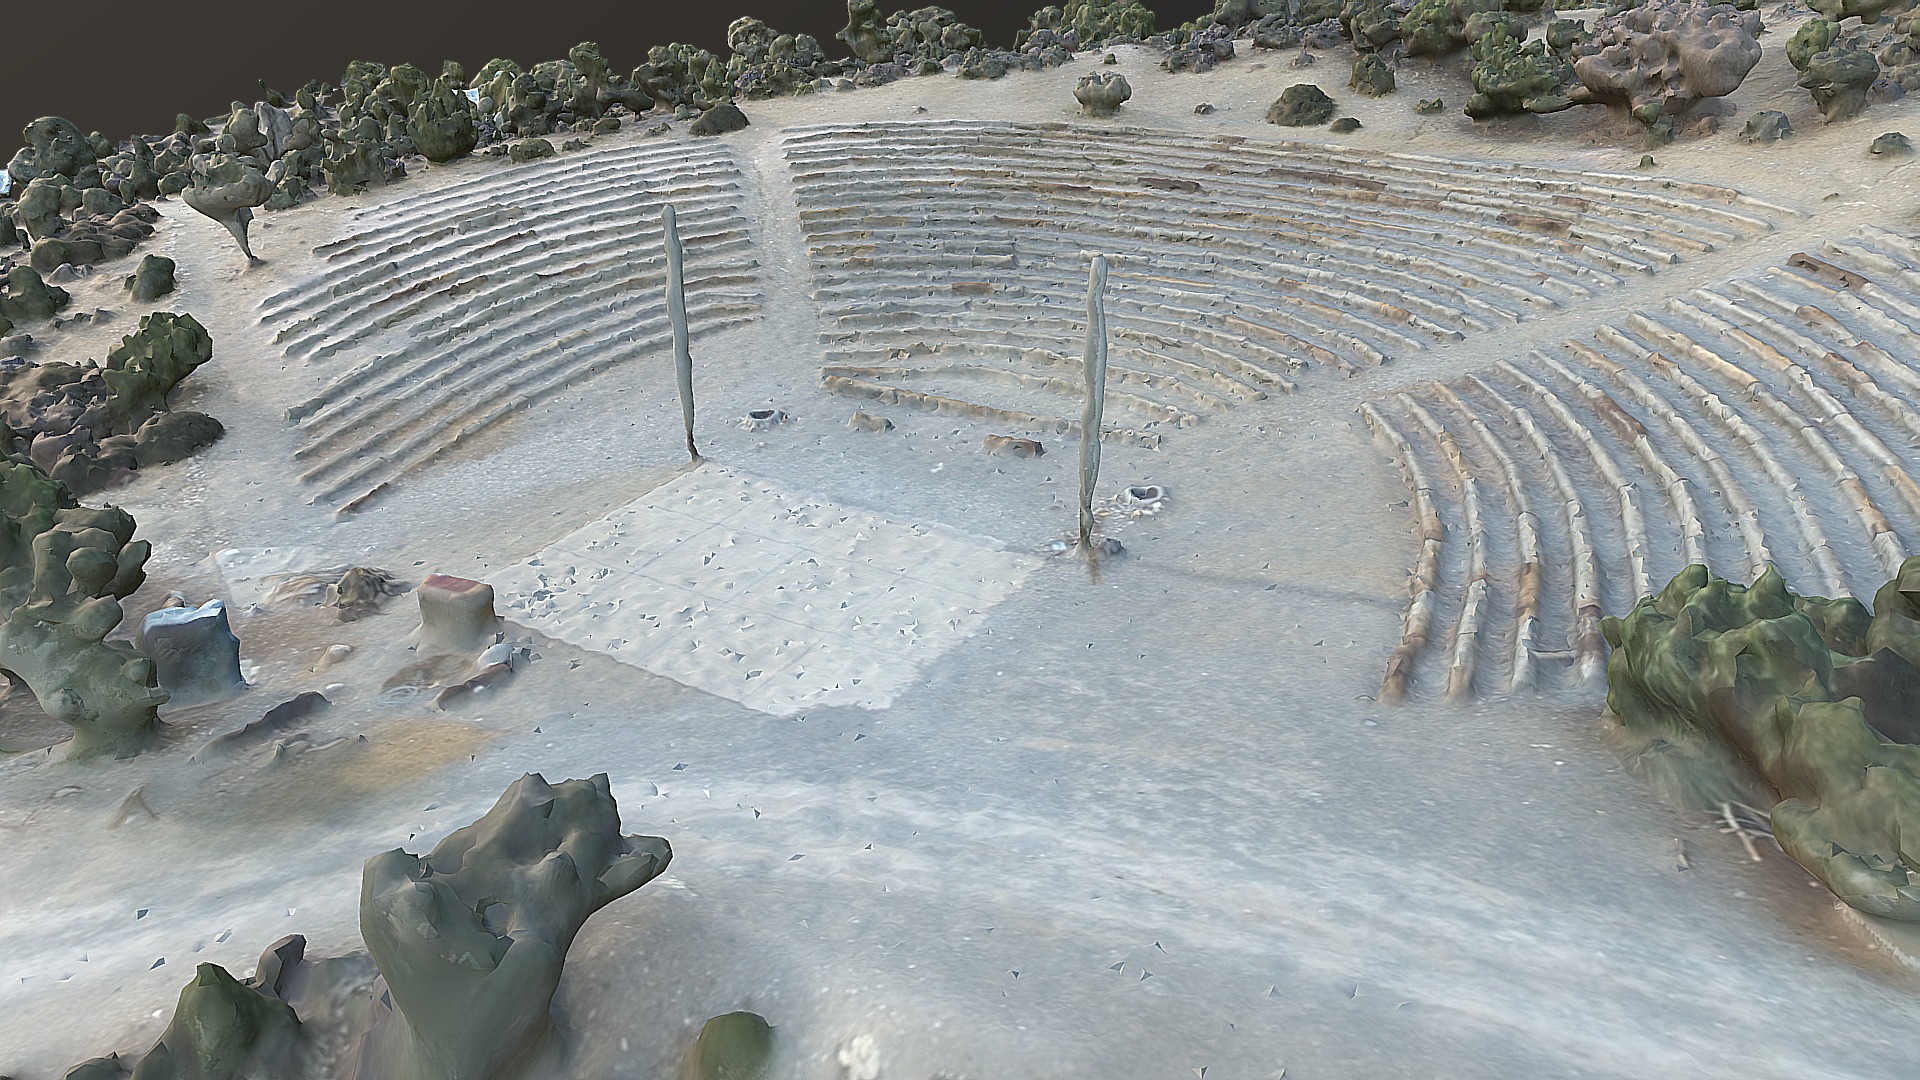 3D model GRADD 3D model / Kimball Amphitheater, Las Vegas - This is a 3D model of the GRADD 3D model / Kimball Amphitheater, Las Vegas. The 3D model is about a rocky area with a fence.